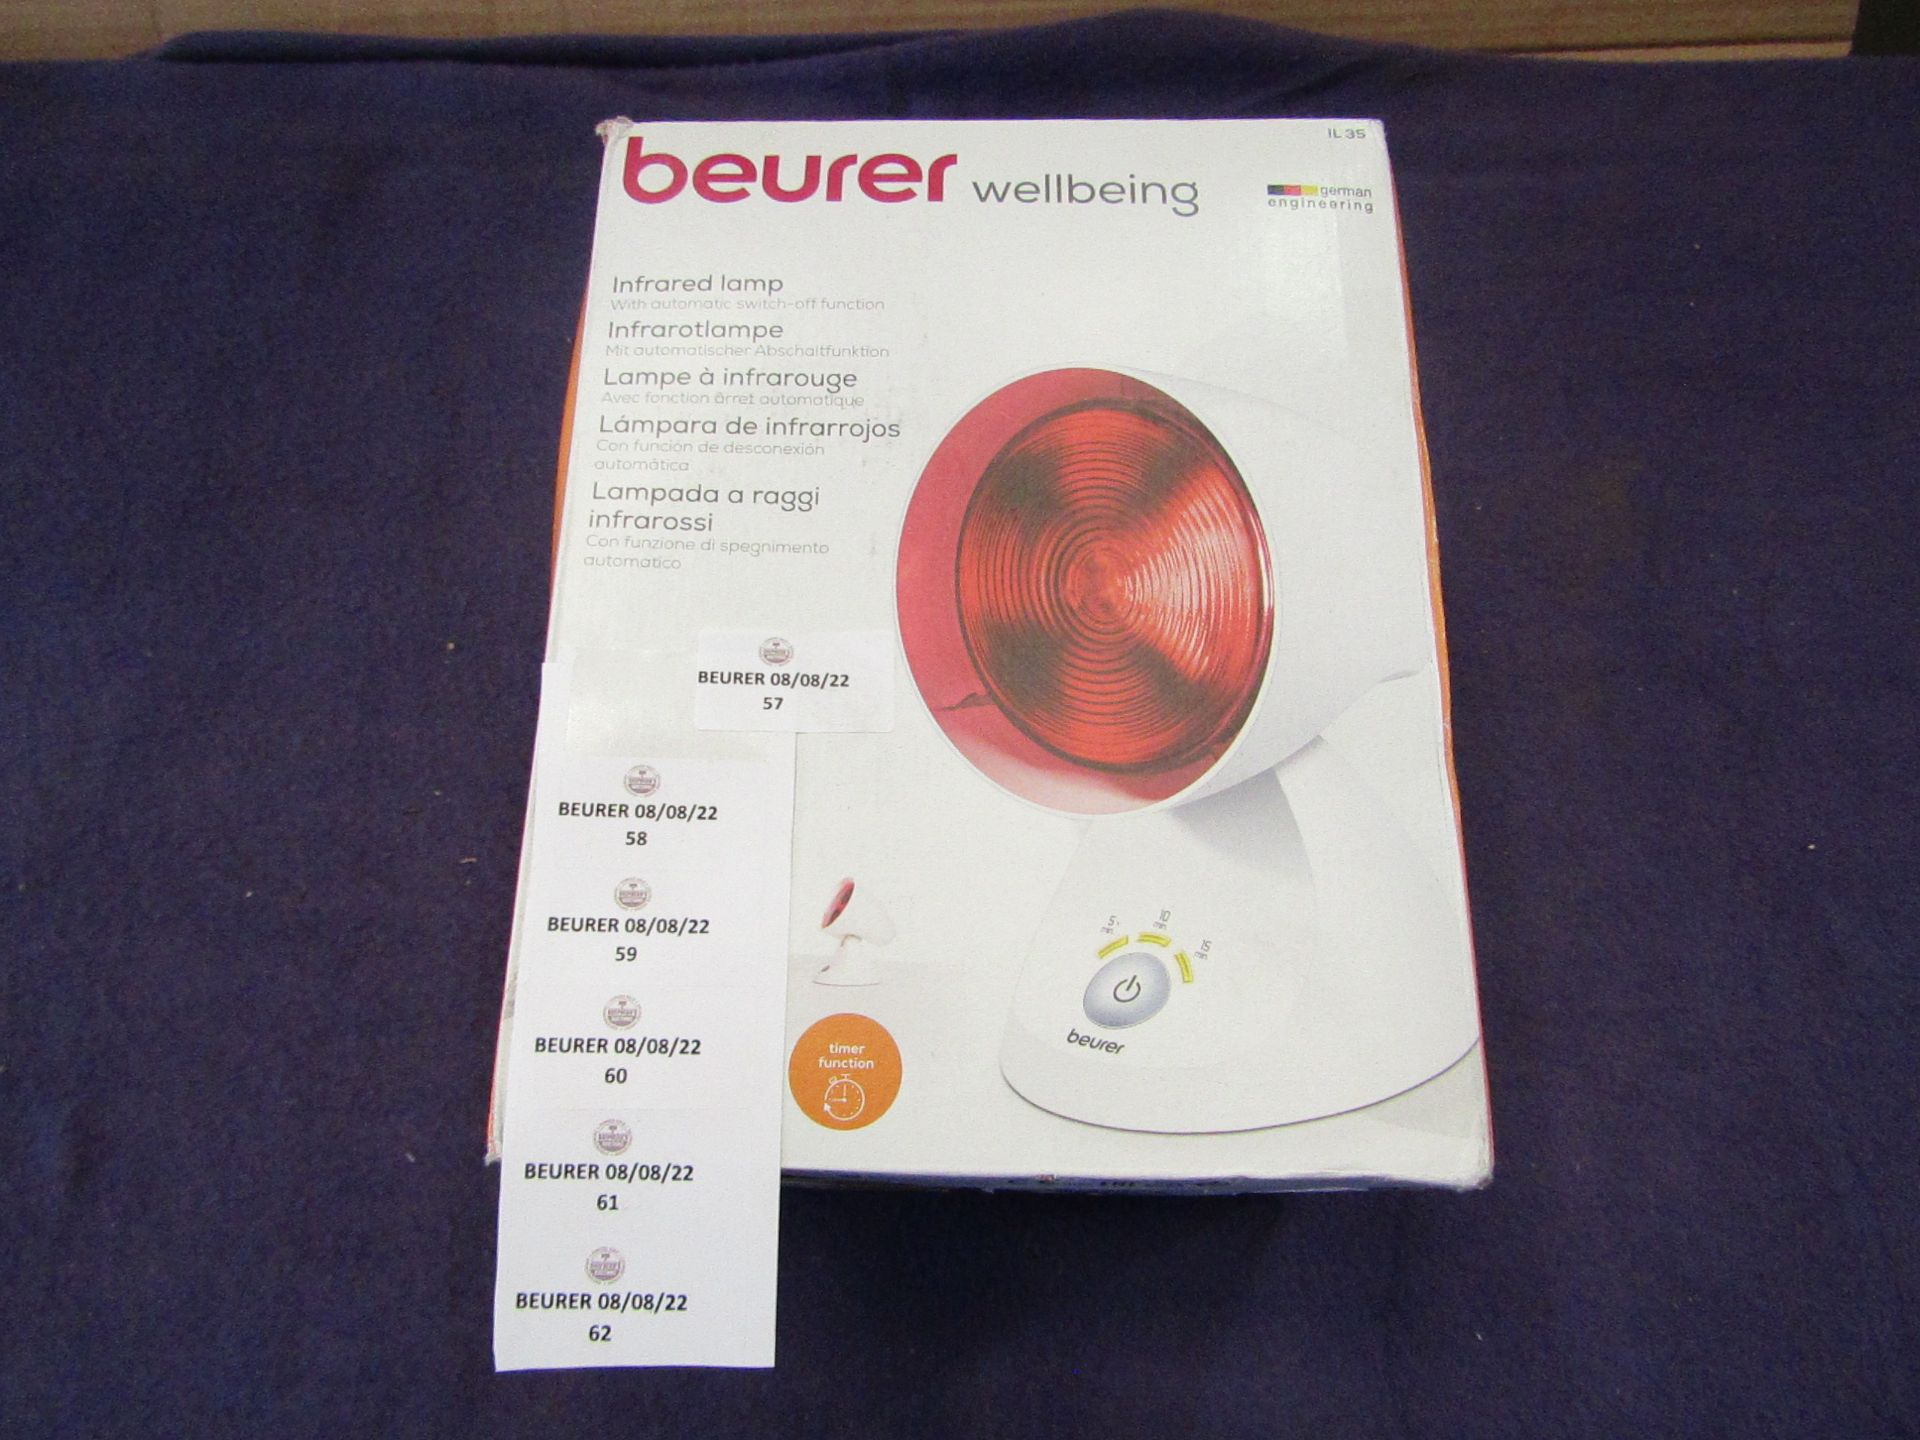 Beurer - Infrared Lamp - IL35 - Untested & Boxed. RRP £62.